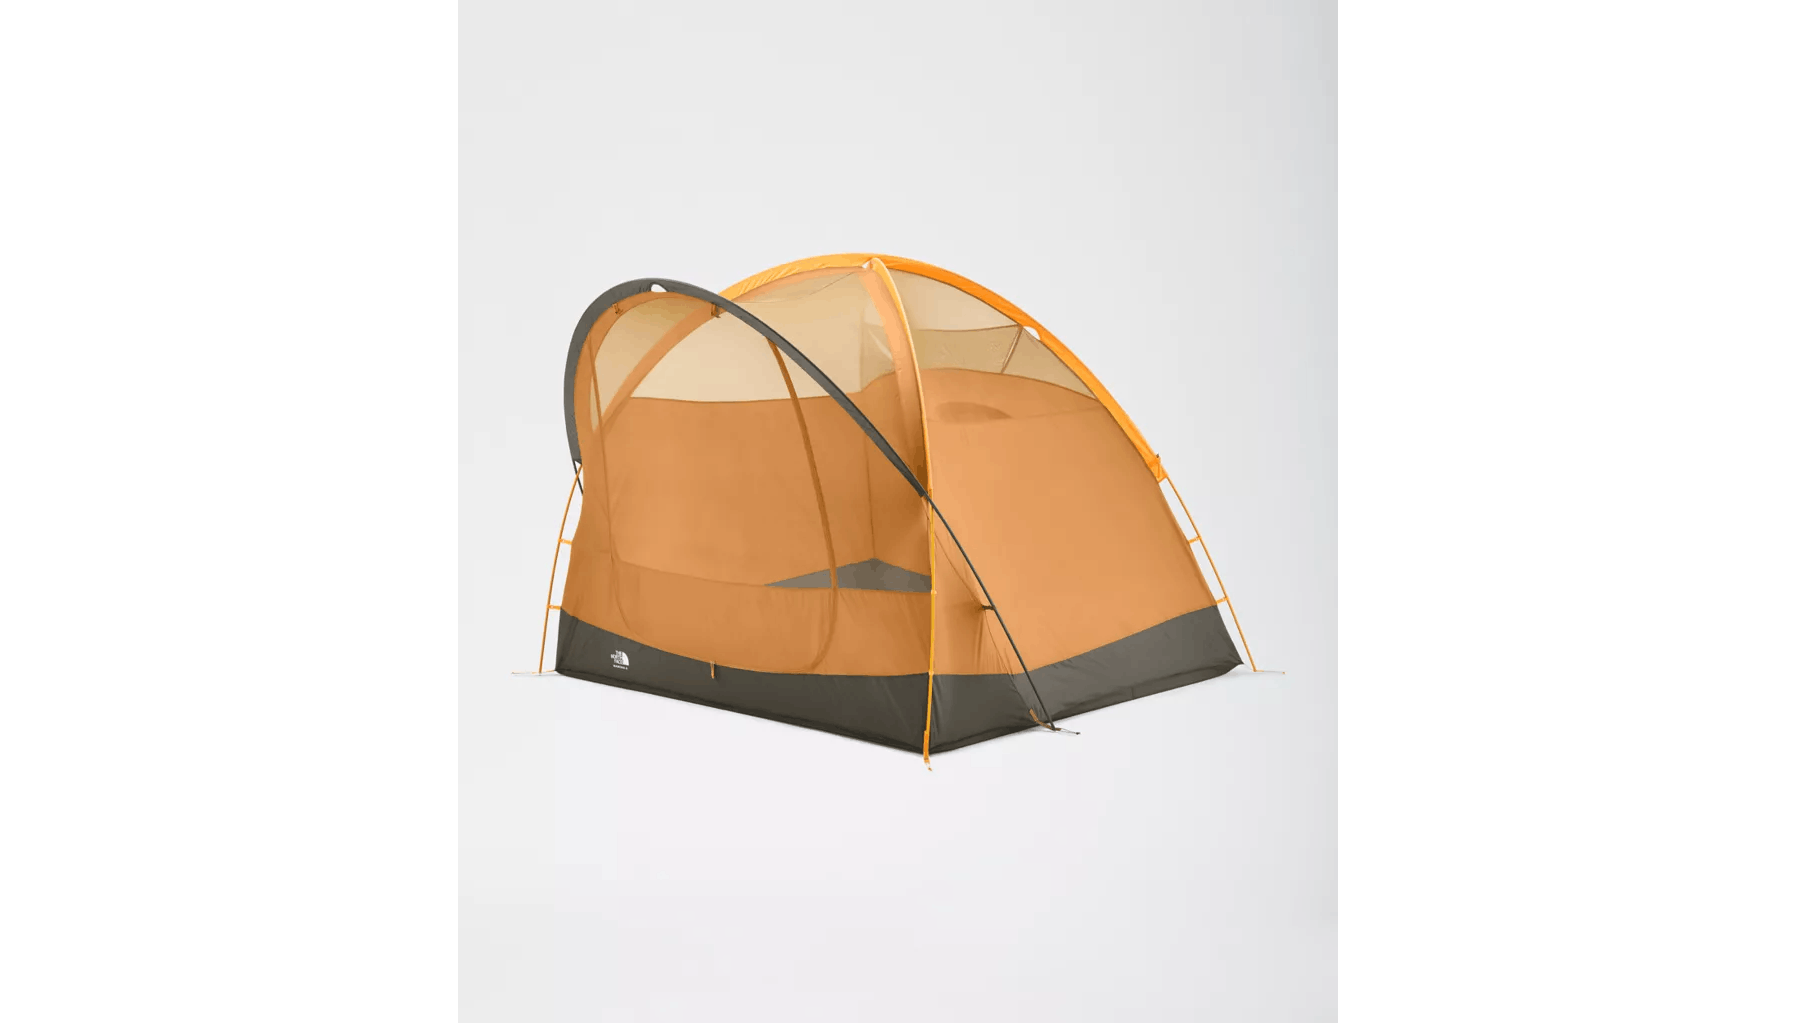 The North Face Wawona 4 Person Tent · Light Exumberance Orange/Timber Tan/New Taupe Green